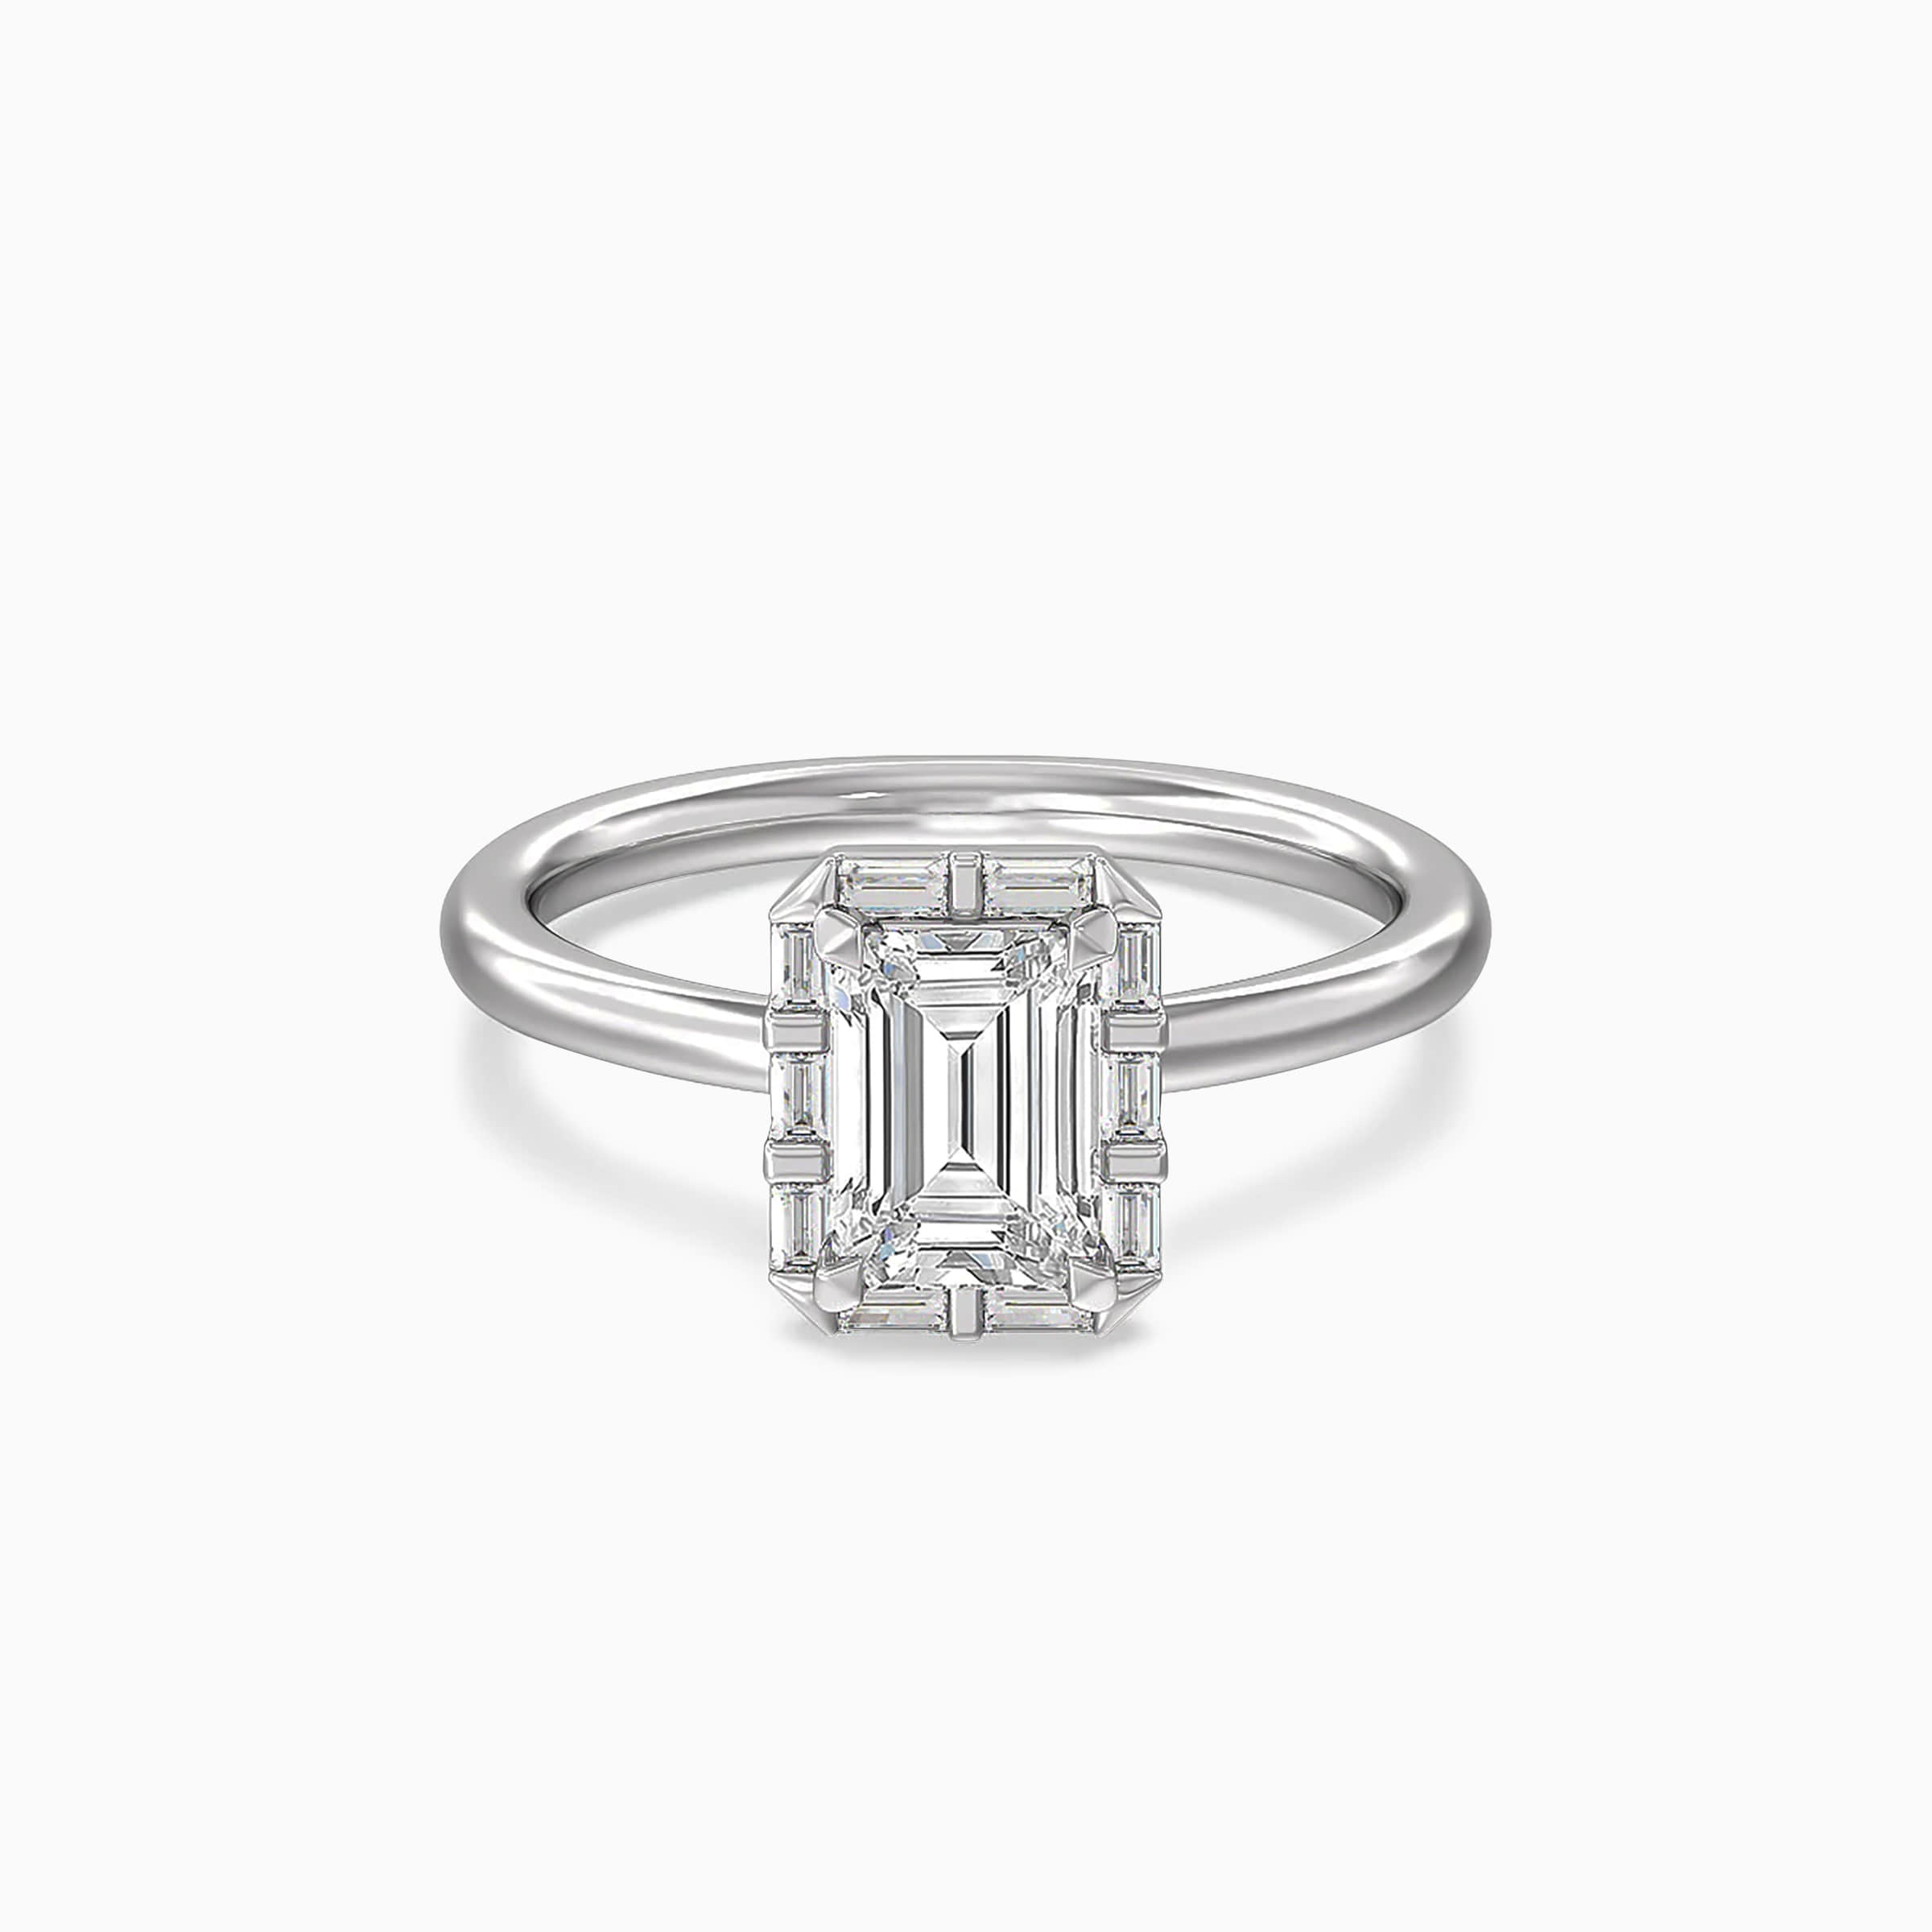 Darry Ring emerald cut halo engagement ring white gold